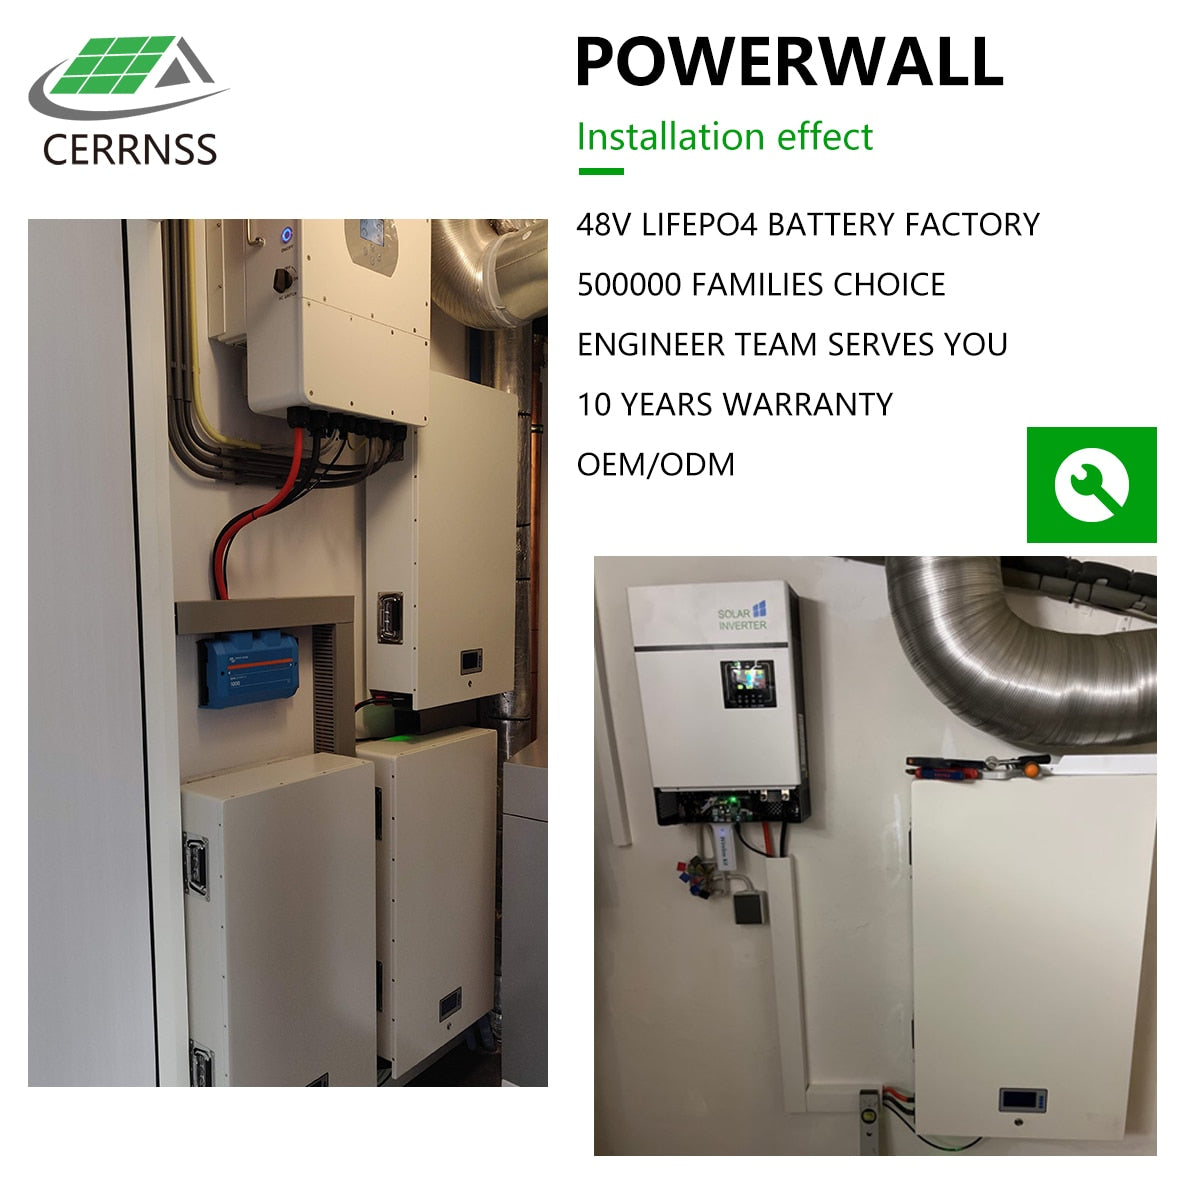 LiFePO4 Battery 48V 200Ah 10Kw Powerwall 51.2V Built-in BMS Parallel 320Kw With CAN RS485＞6000 Cycles For Solar 10 Year Warranty